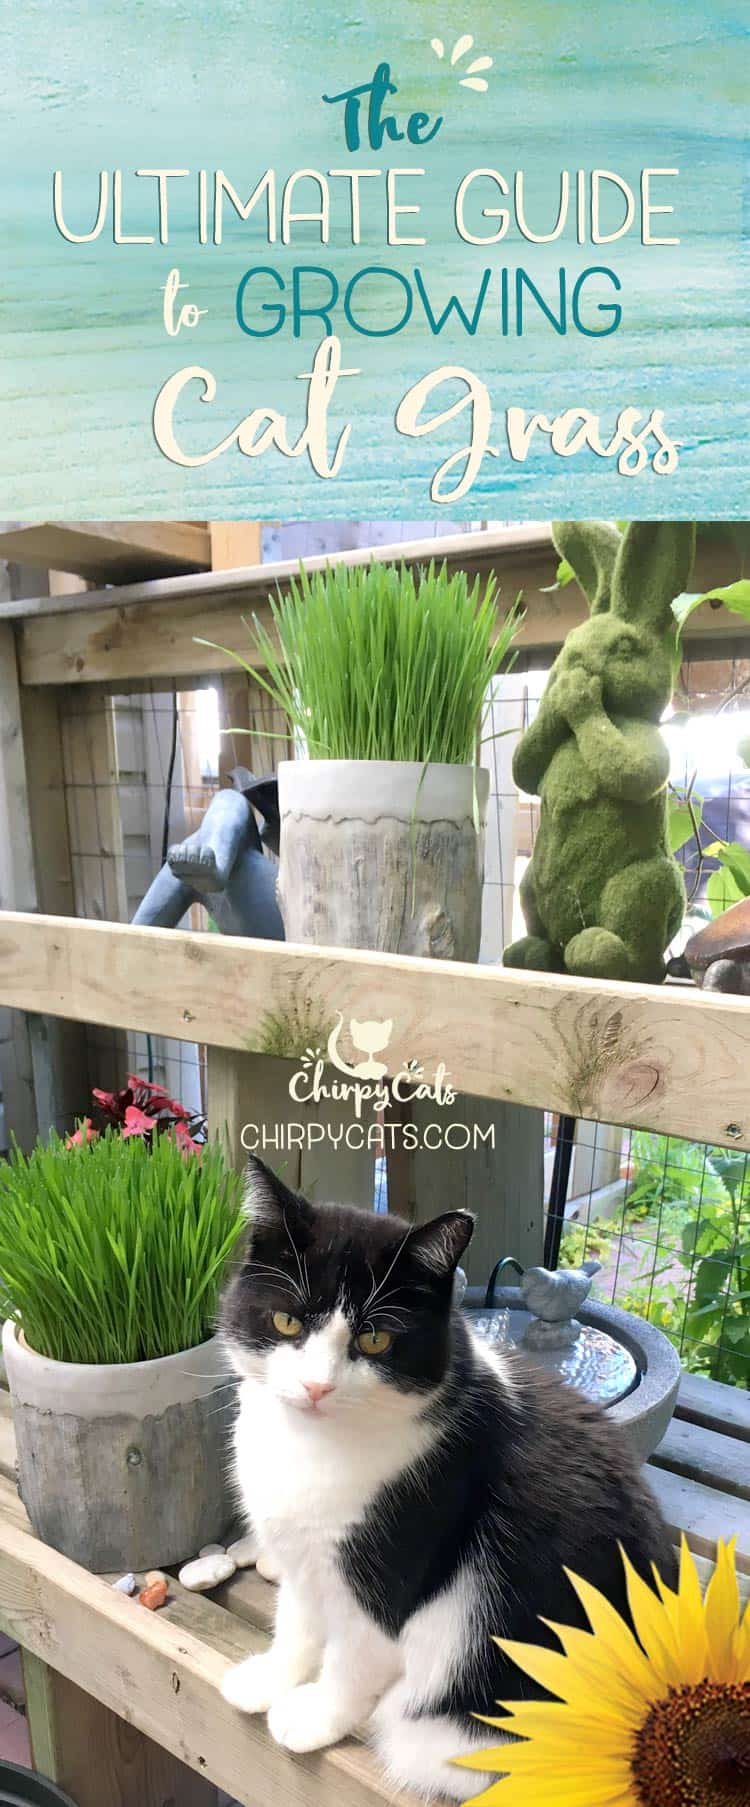 The ultimate guide to growing cat grass